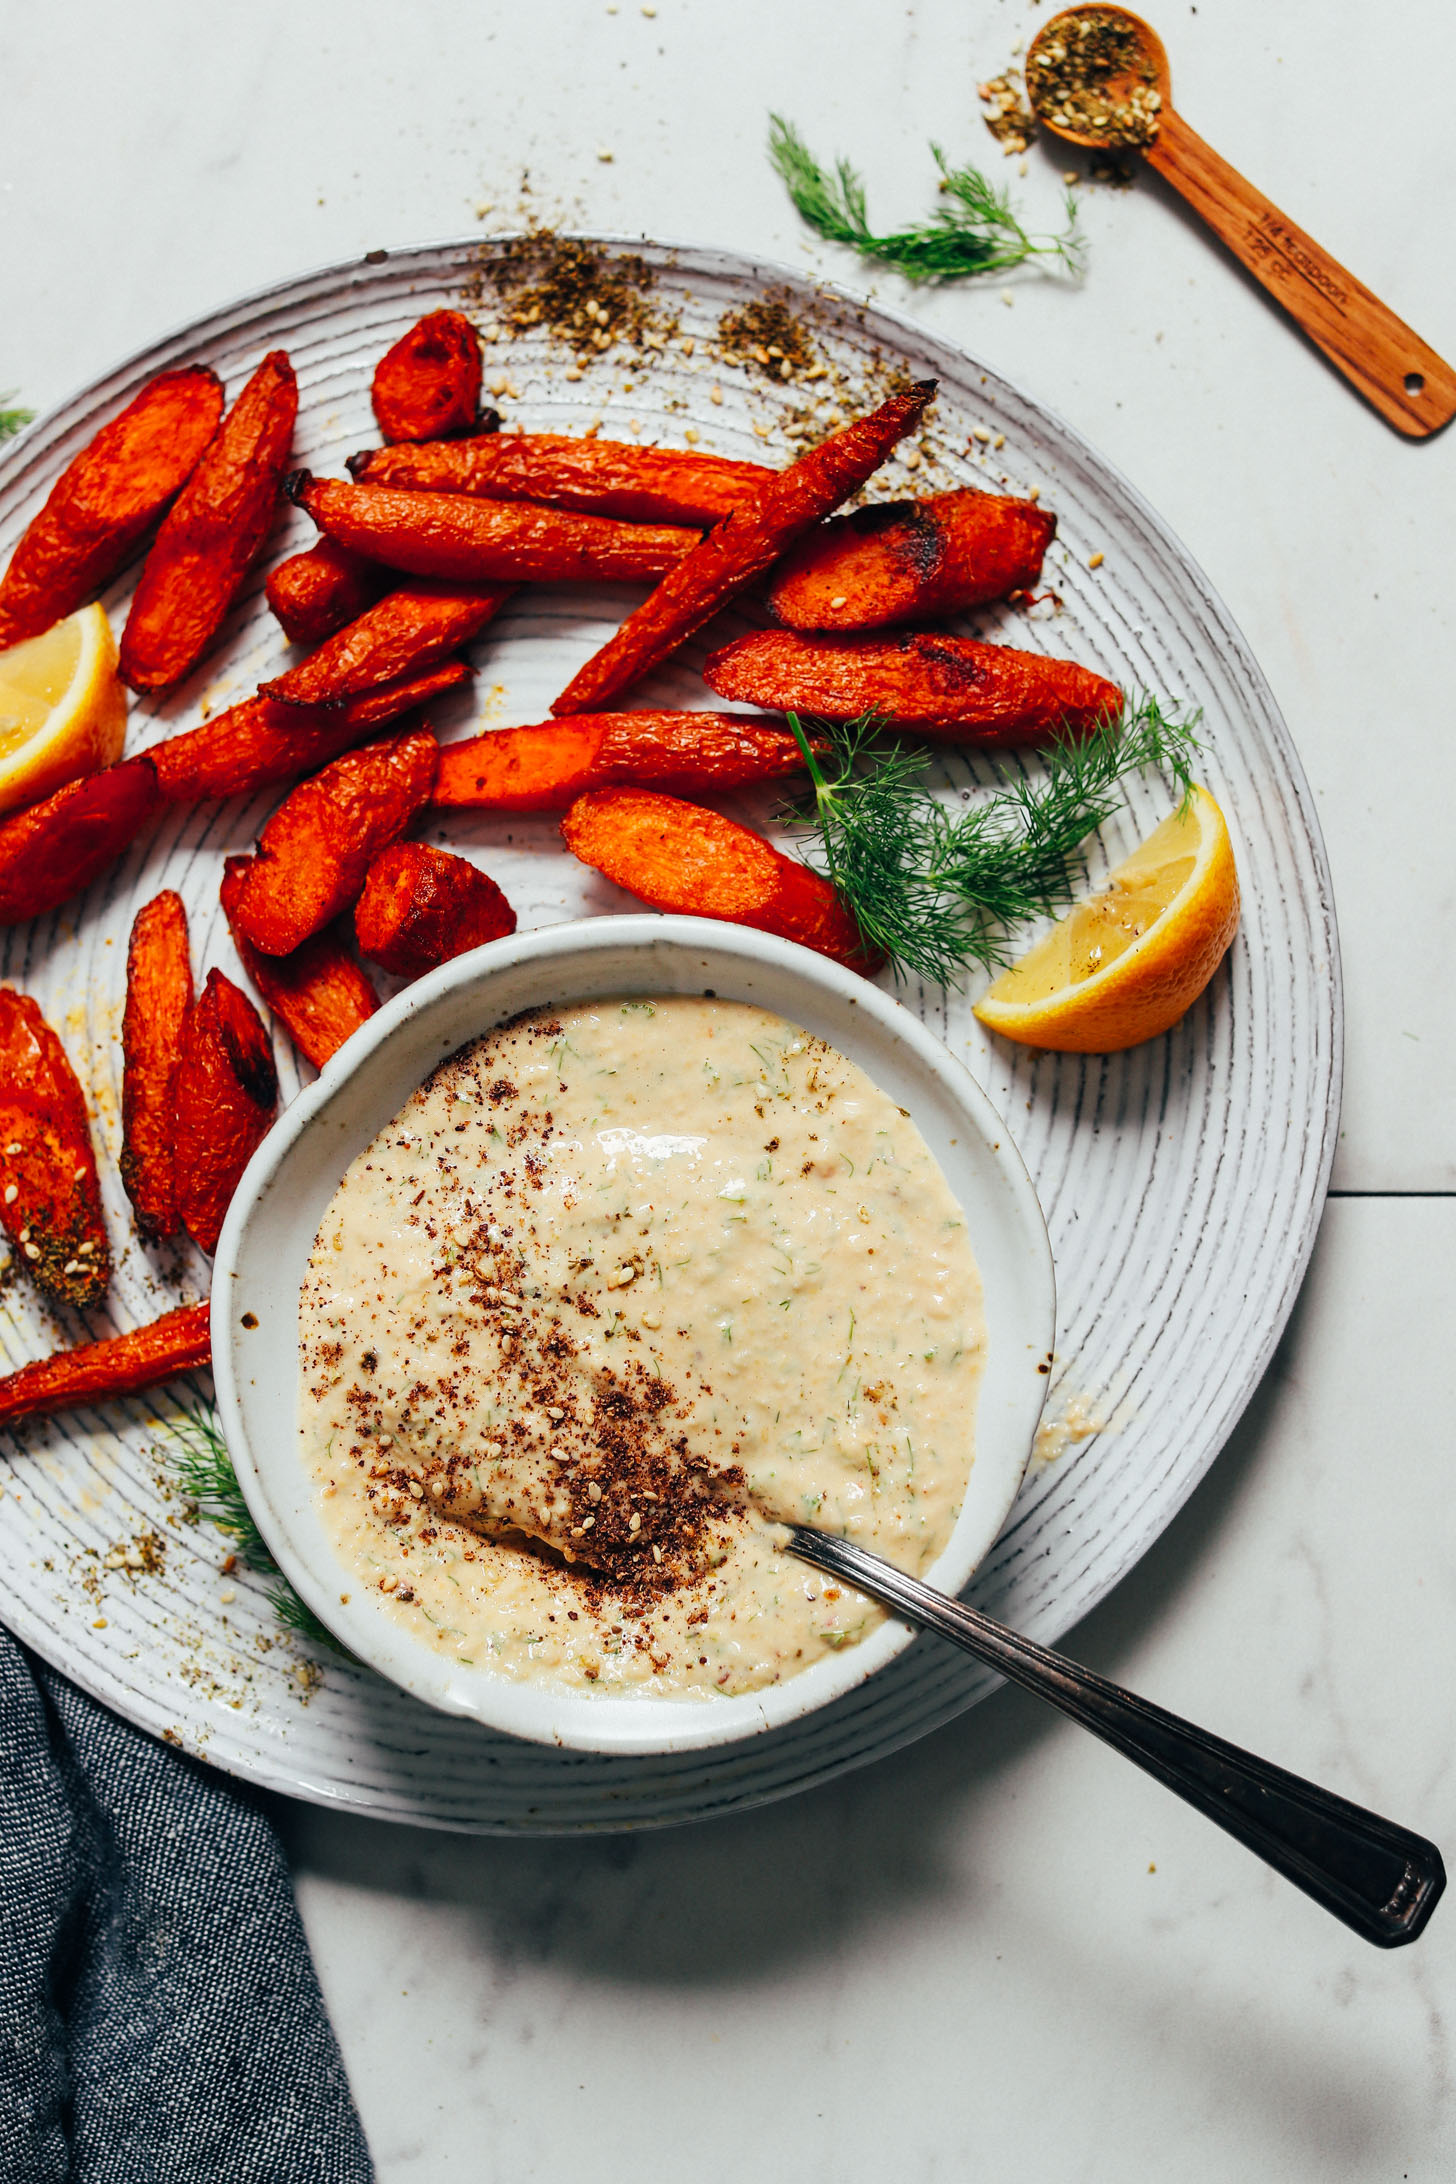 Plate with roasted carrots and a bowl of our easy Dill Garlic Sauce recipe